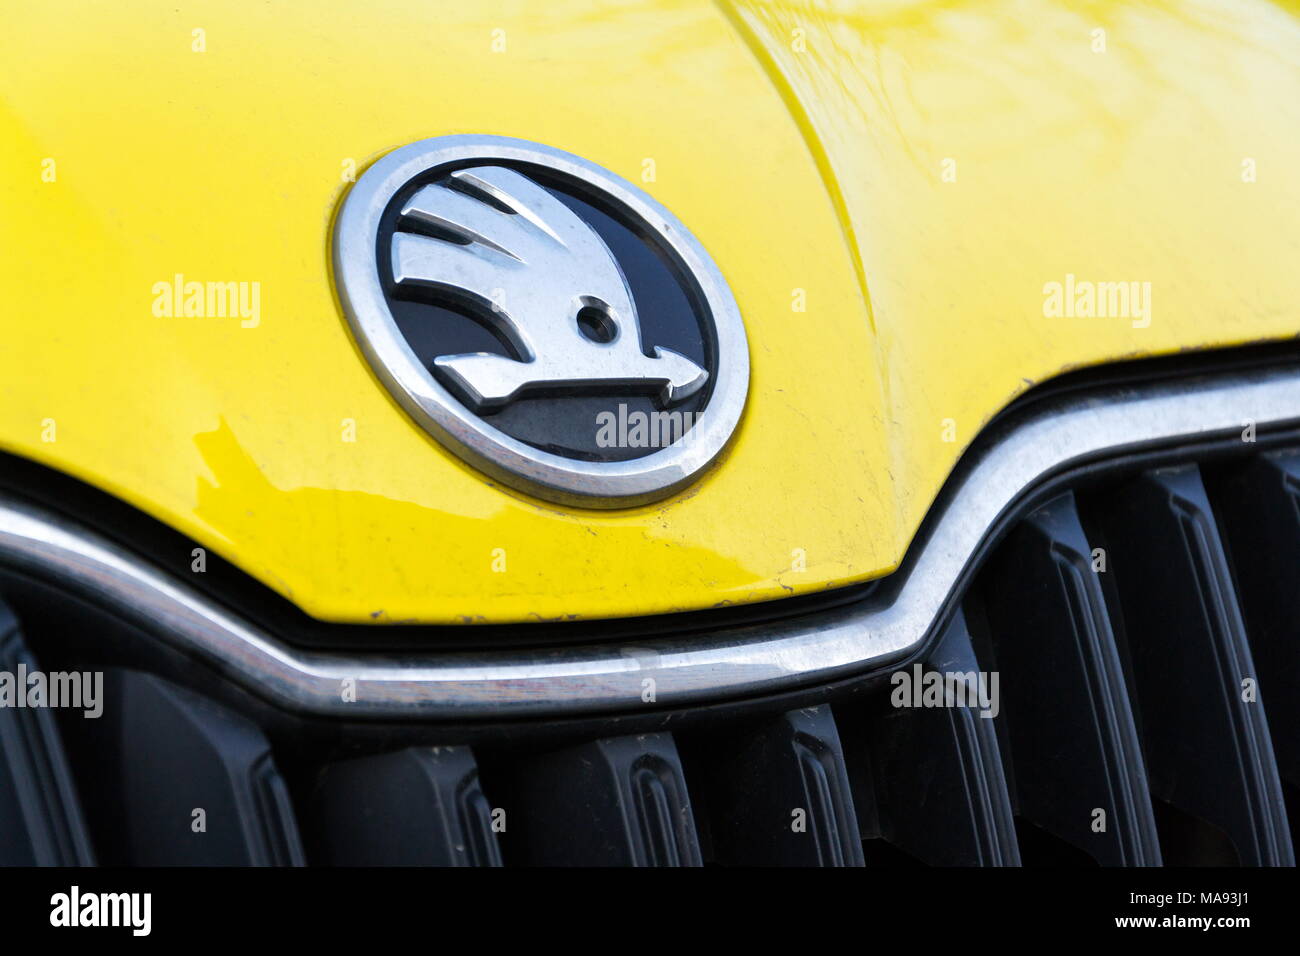 PRAGUE, CZECH REPUBLIC - MARCH 25 2018: Skoda Auto automobile manufacturer from Volkswagen Group company logo on yellow dirty car on March 25, 2018 in Stock Photo